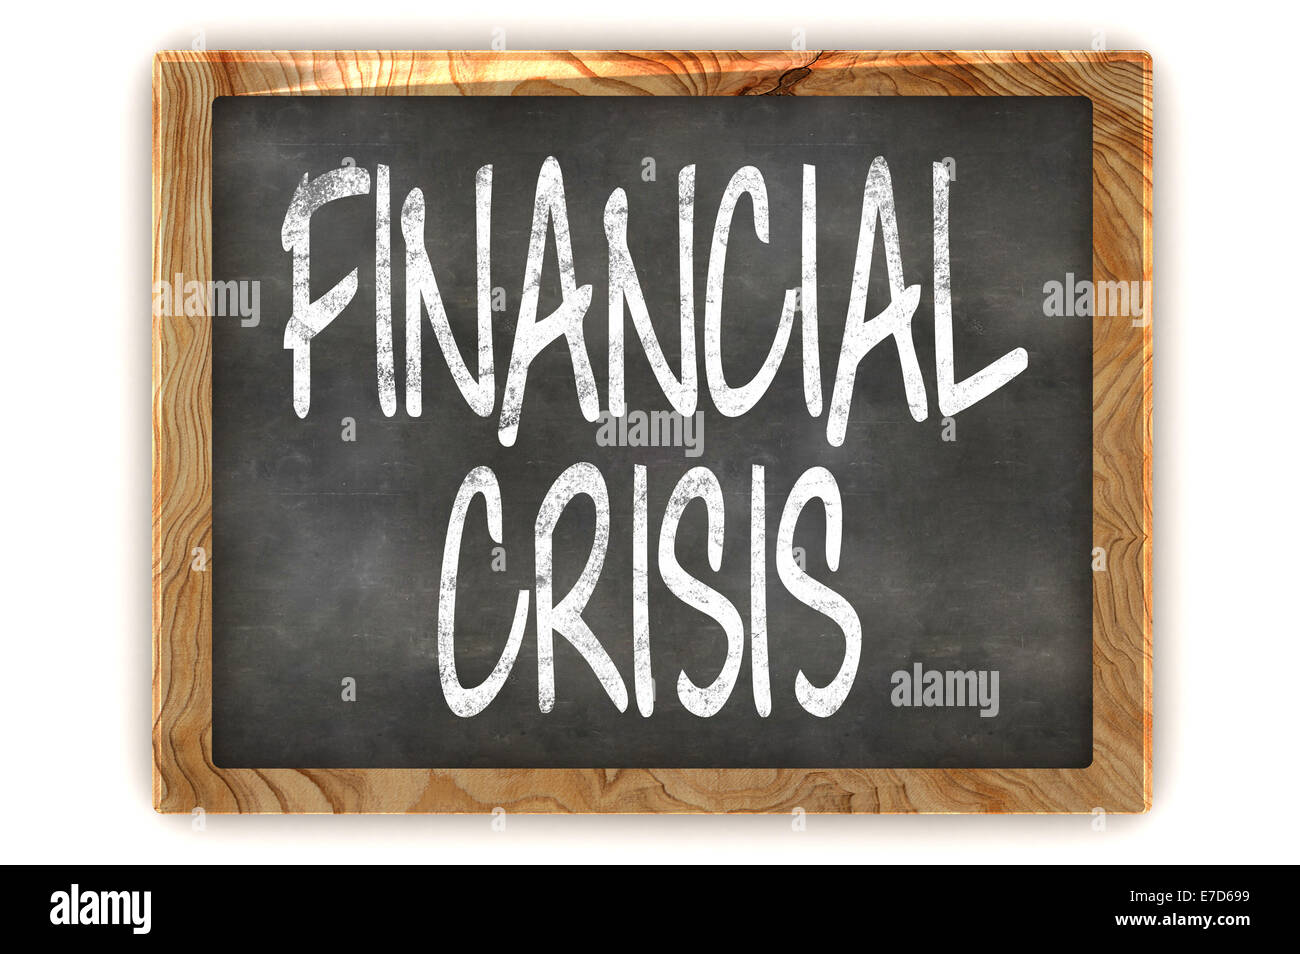 A Colourful 3d Rendered Illustration of a Blackboard Showing Financial Crisis Stock Photo